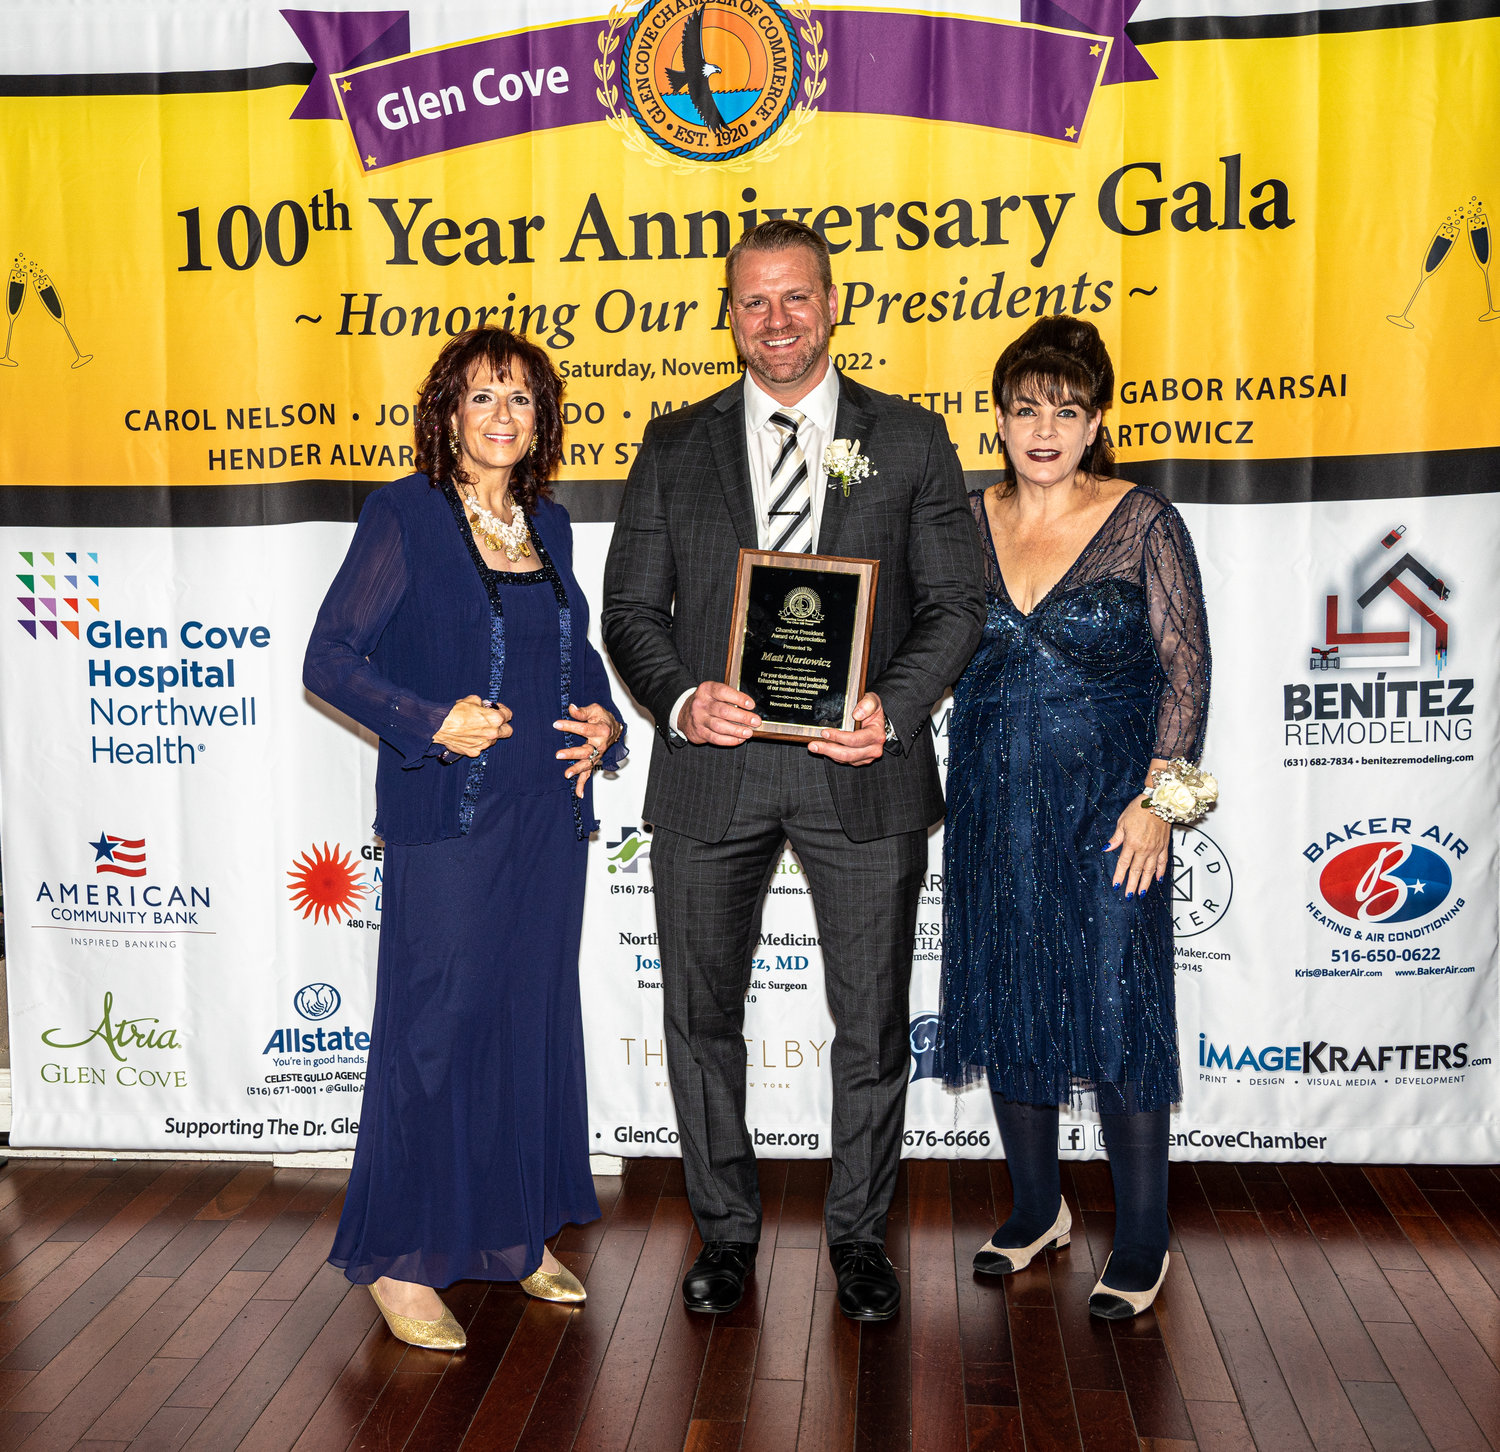 Dr. Maxine Cappel Mayreis, the chamber’s vice president, and Mary Stanco, its community liaison, recognized Matt Nartowicz for his dedication to the chamber as its current president.